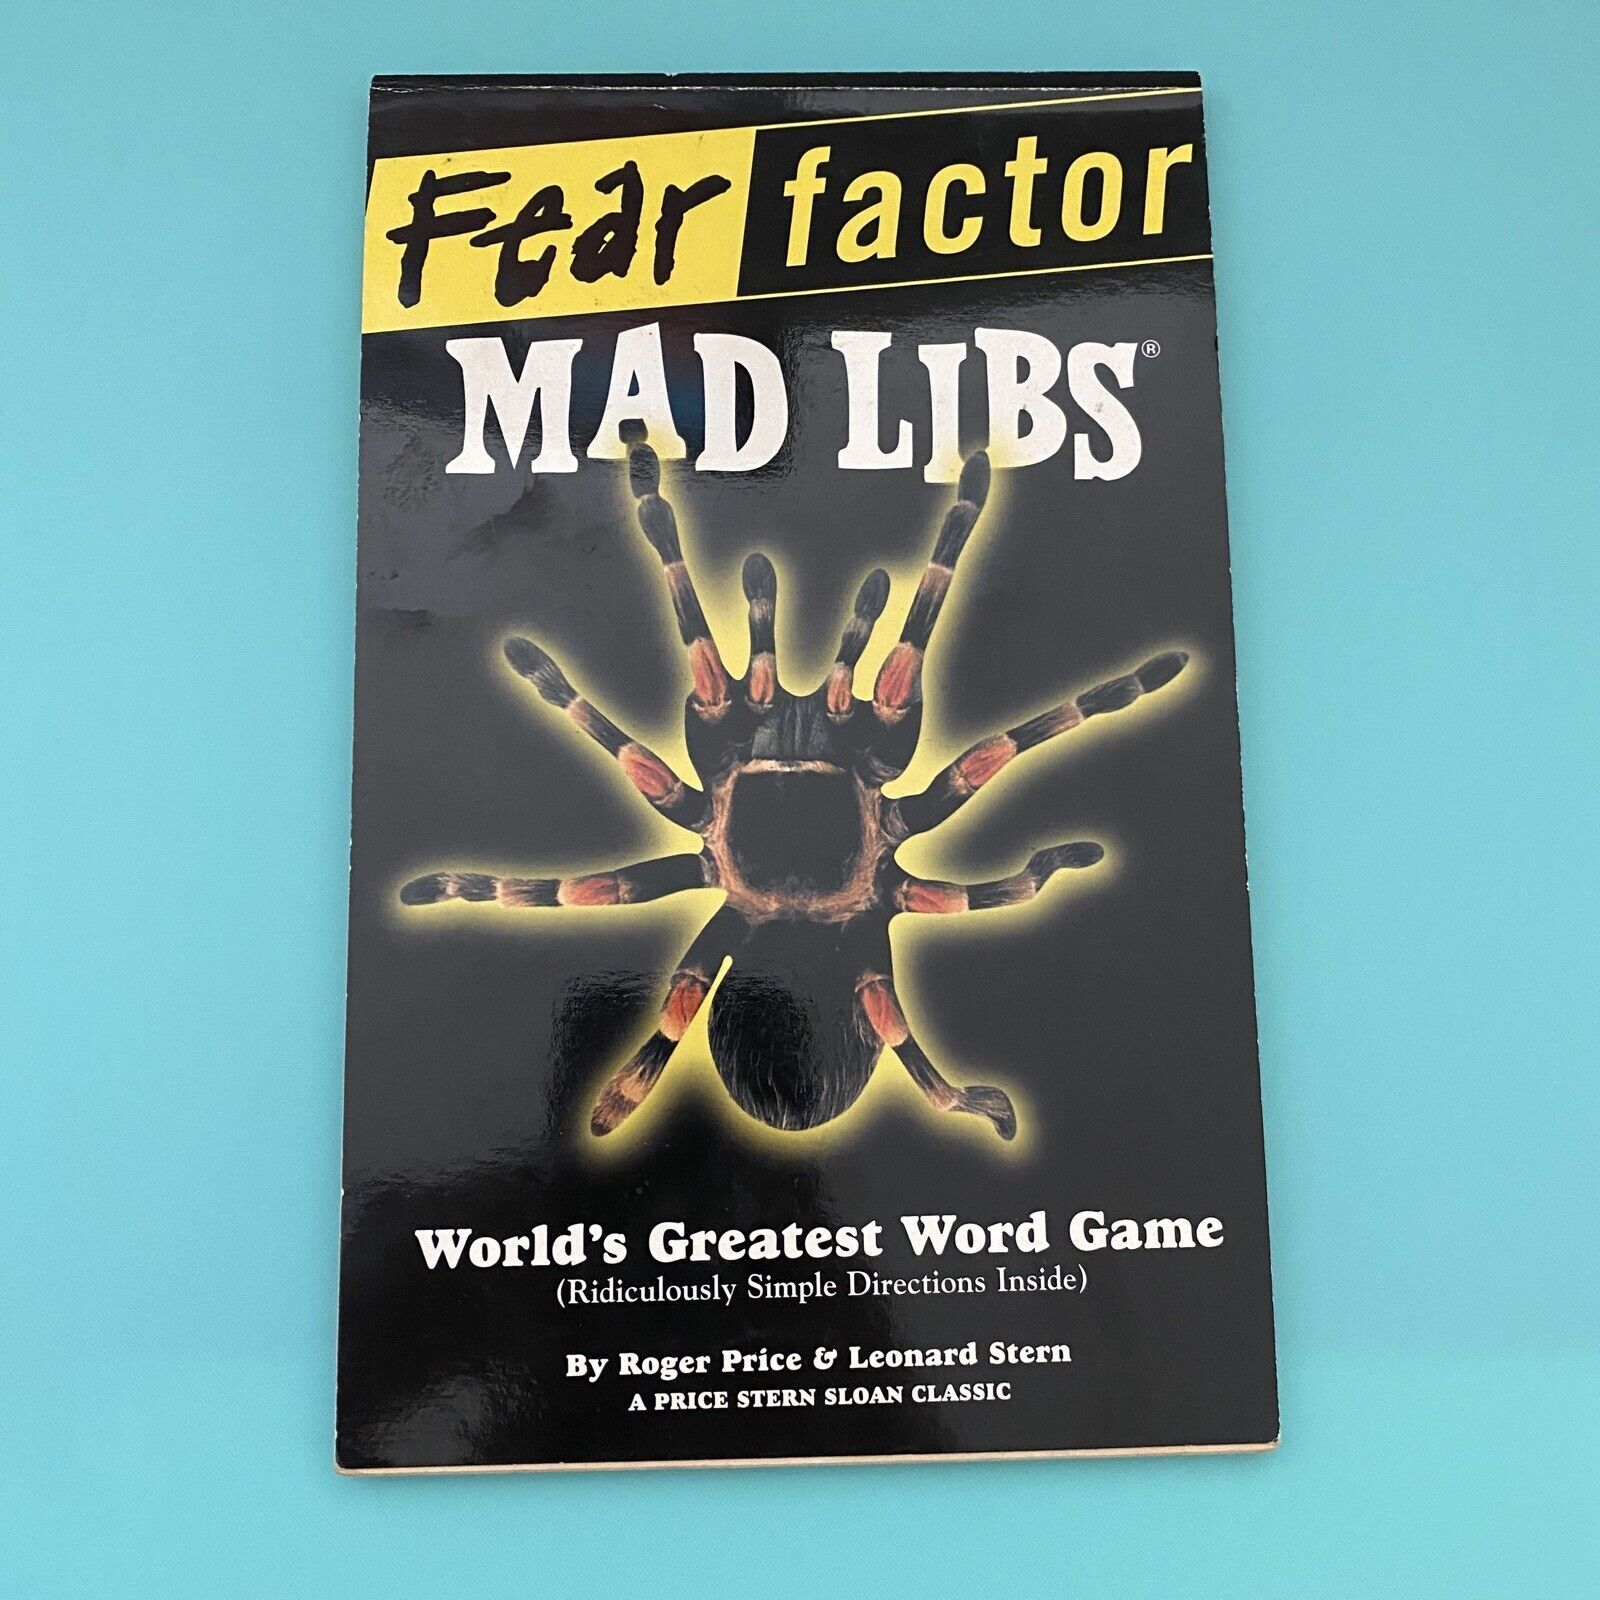 Primary image for Fear Factor MAD LIBS World’s Greatest Word Game 2003